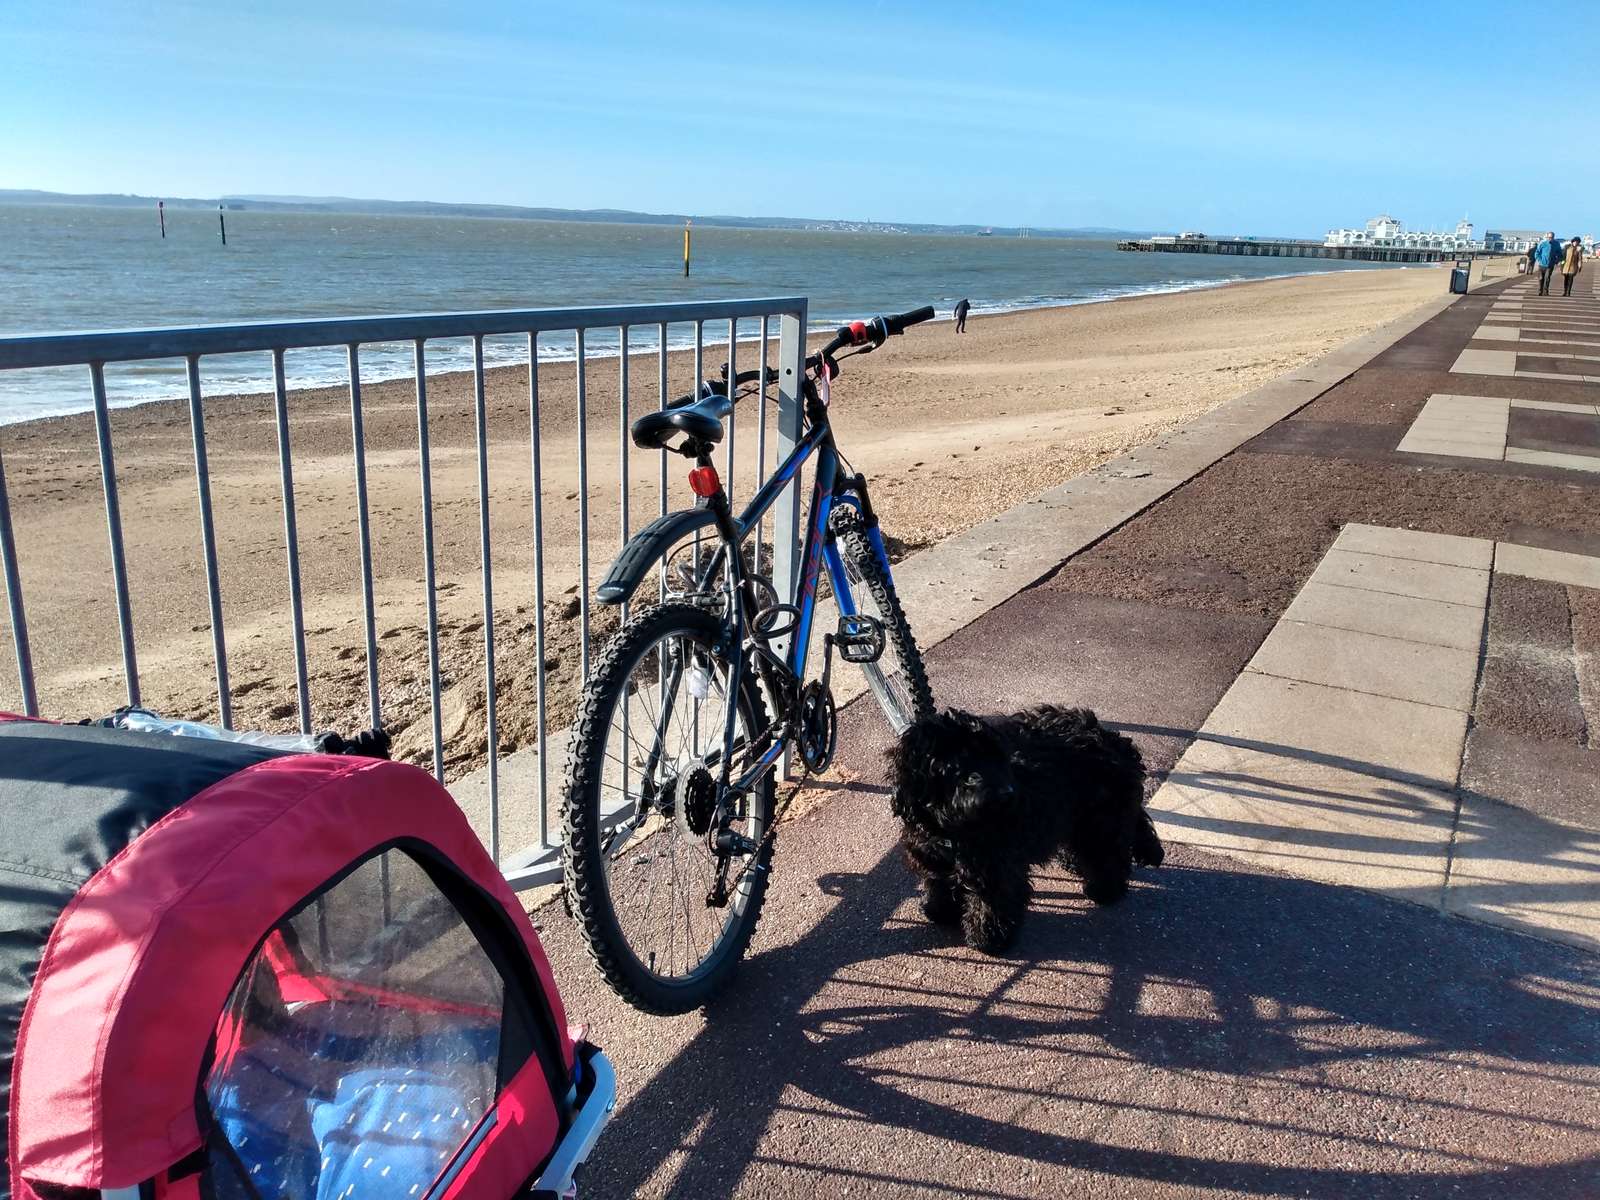 A bike leant against railings at the beach with a small dog sat on the floor and a child buggy behind the bike